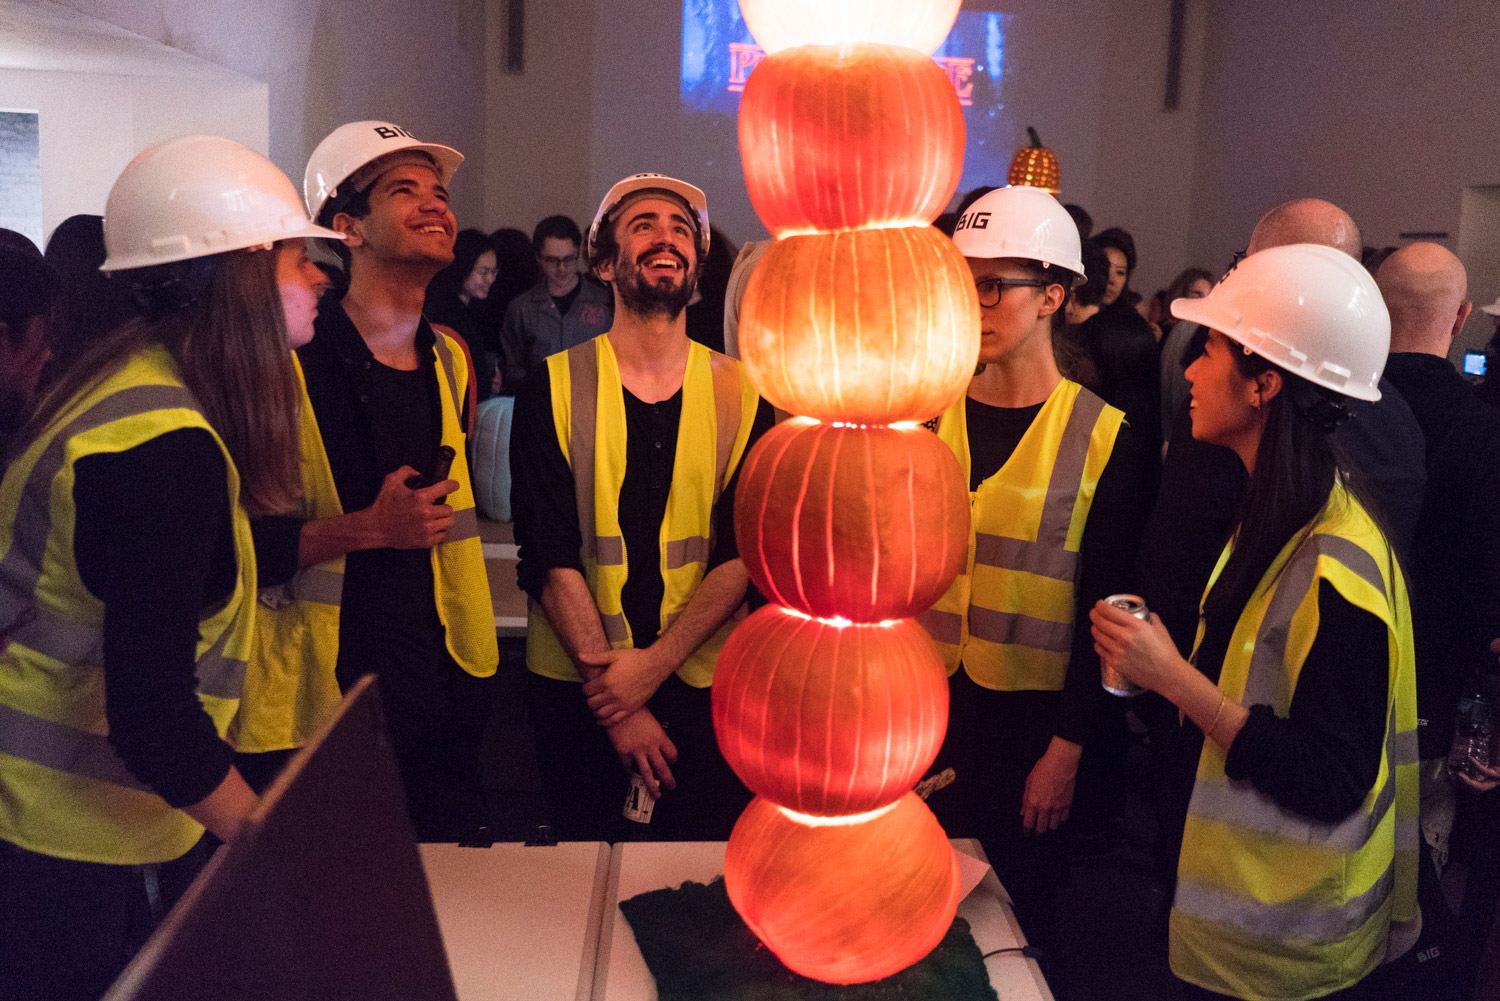 People in hard hats and vests surrounding a Pumpkitecture competition entry and looking at it